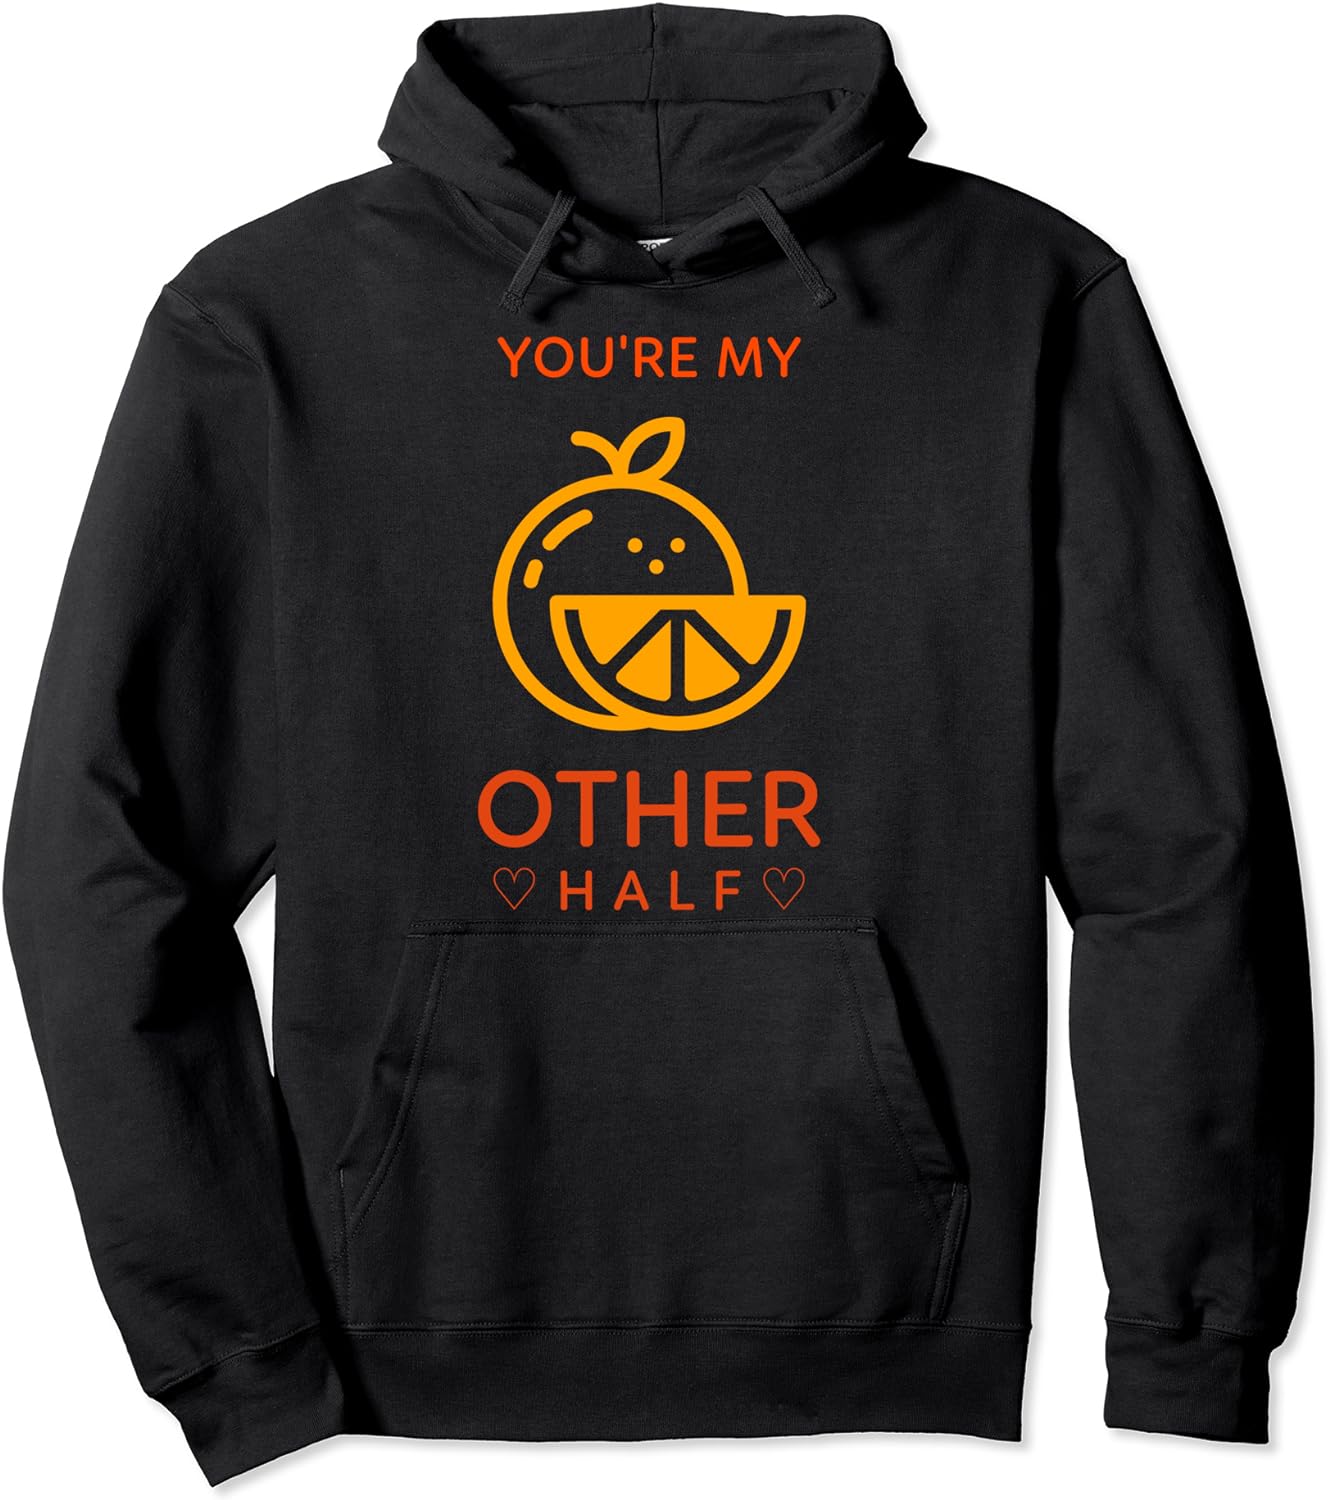 You’re My Other Half Hoodie